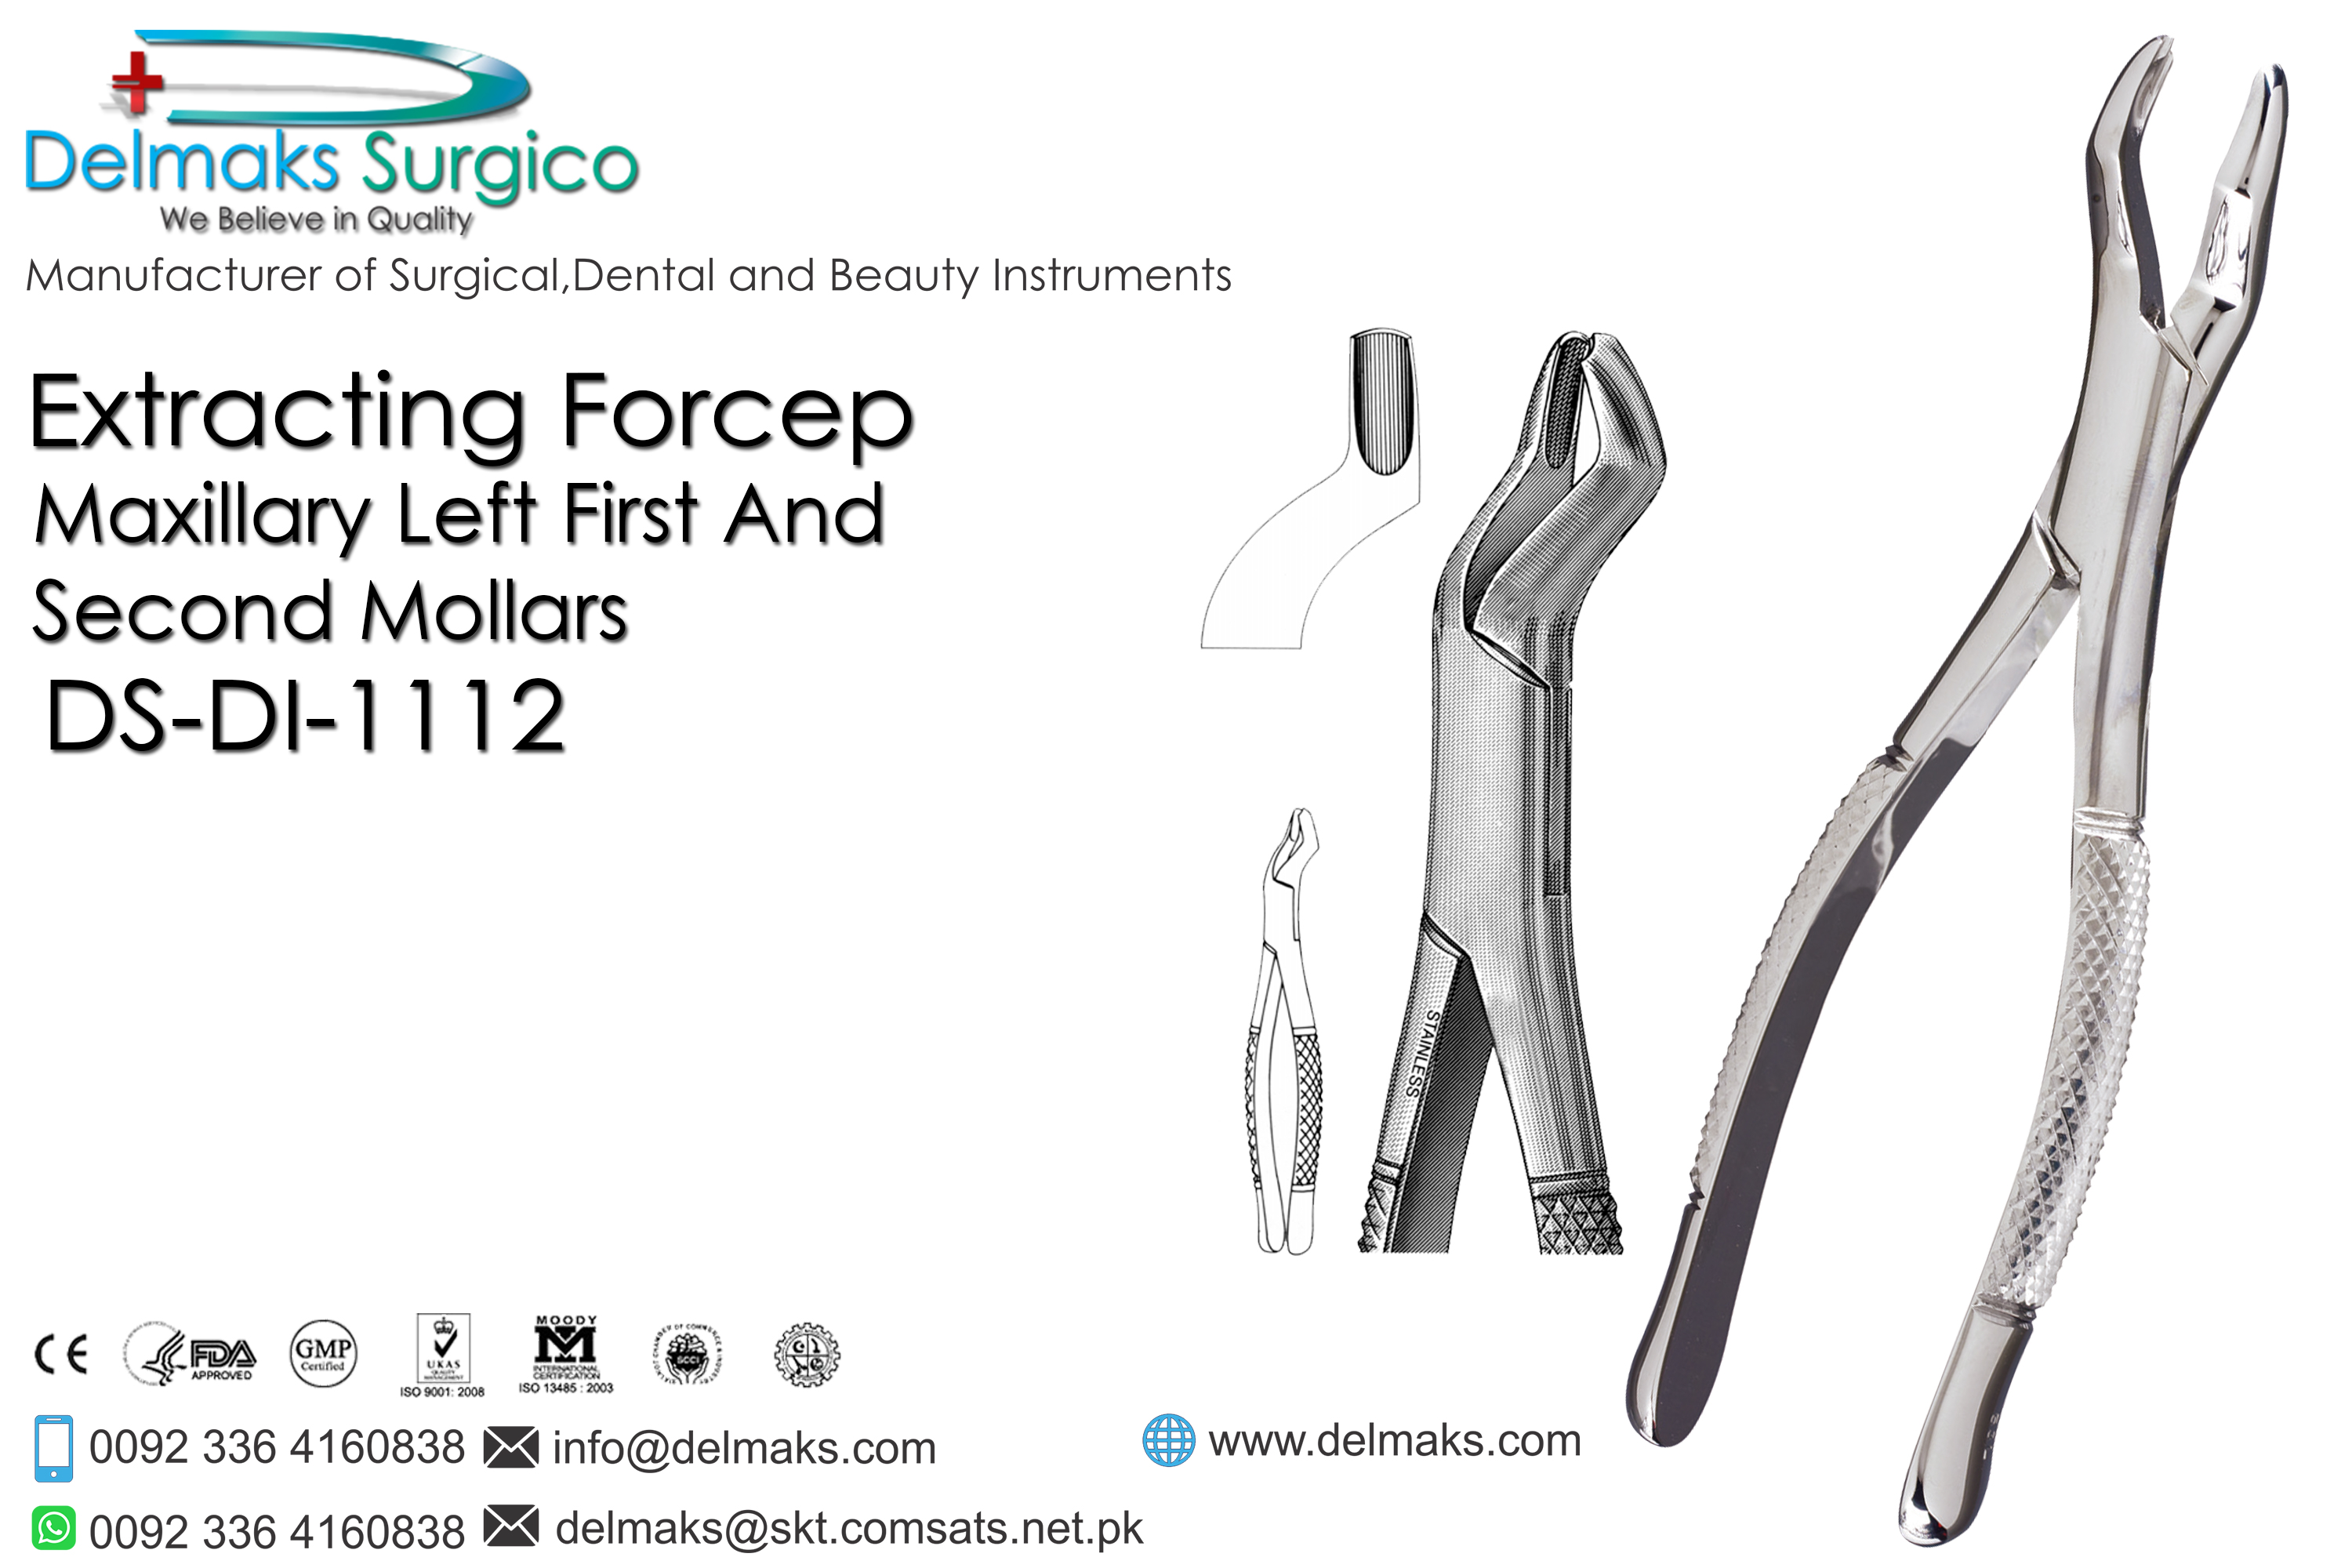 Extracting Forceps (Maxillary Left First And Second Mollars)-Oral and Maxillofacial Surgery Instruments-Dental Instruments-Delmaks Surgico 